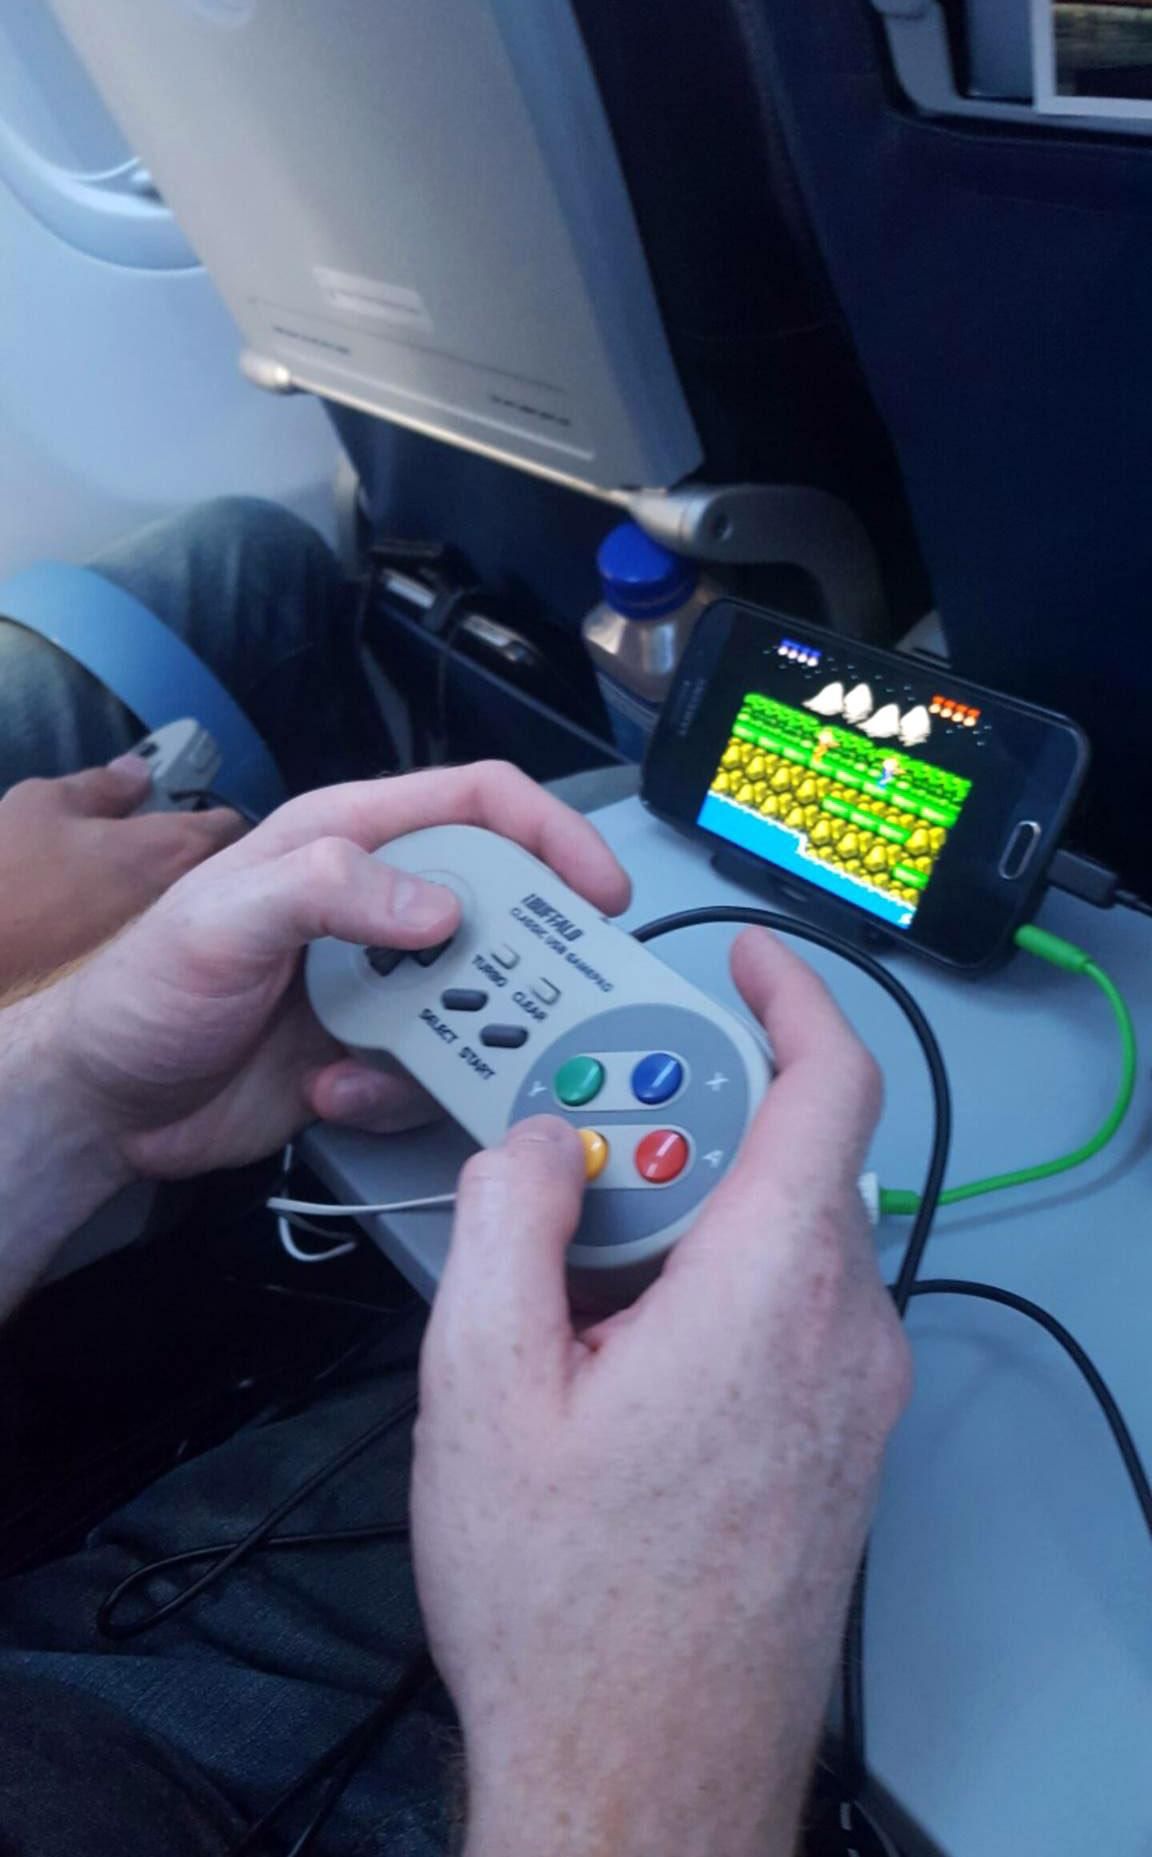 Some 2 player classic gaming during the flight